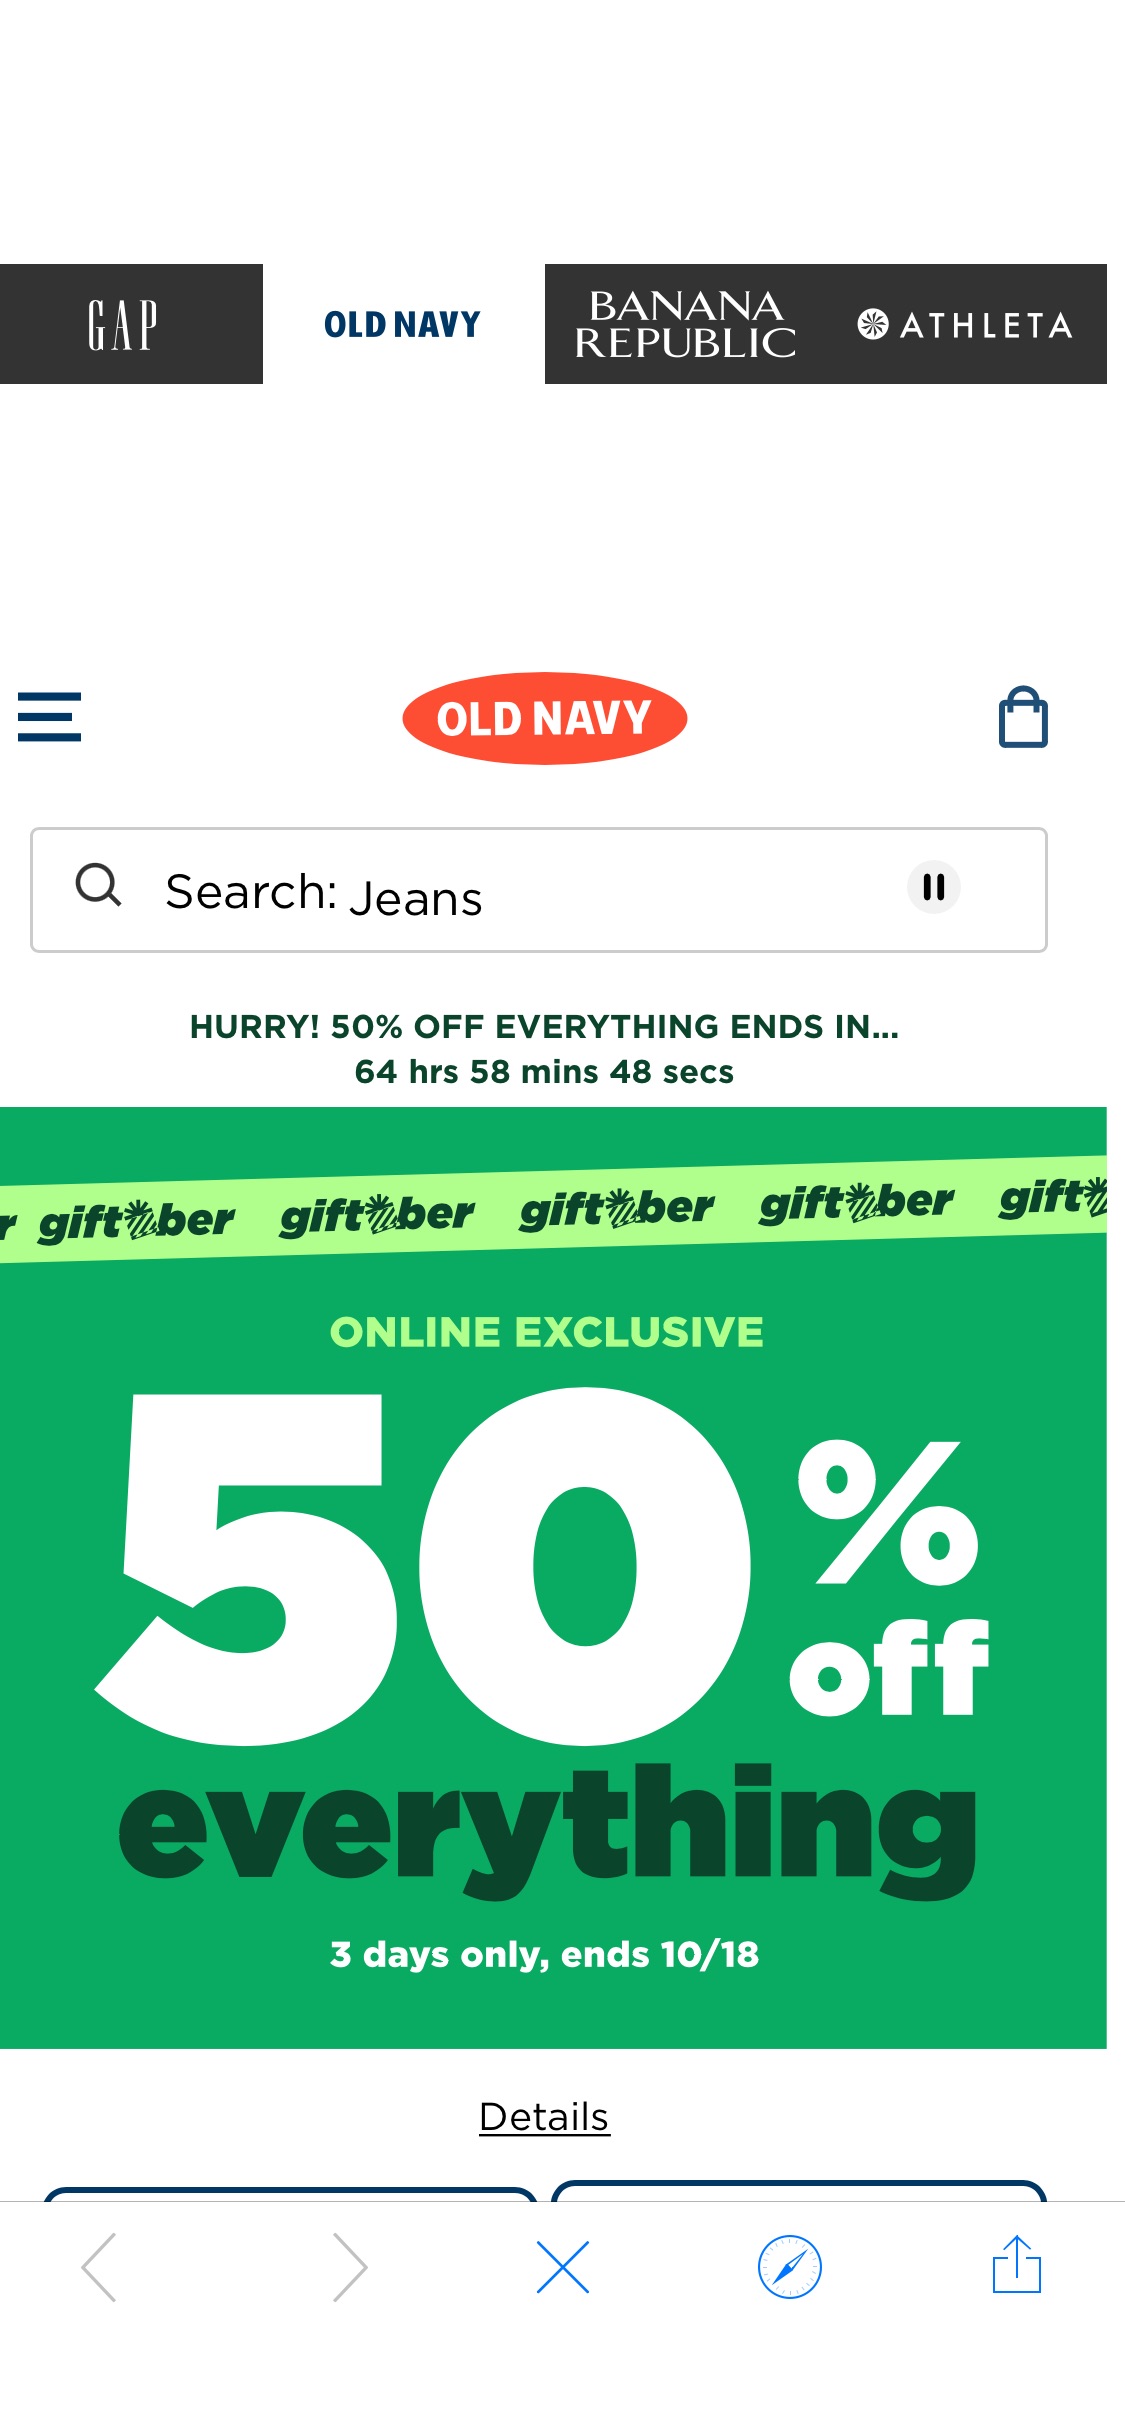 Old Navy | Shop the Latest Fashion for the Whole Family美衣服饰